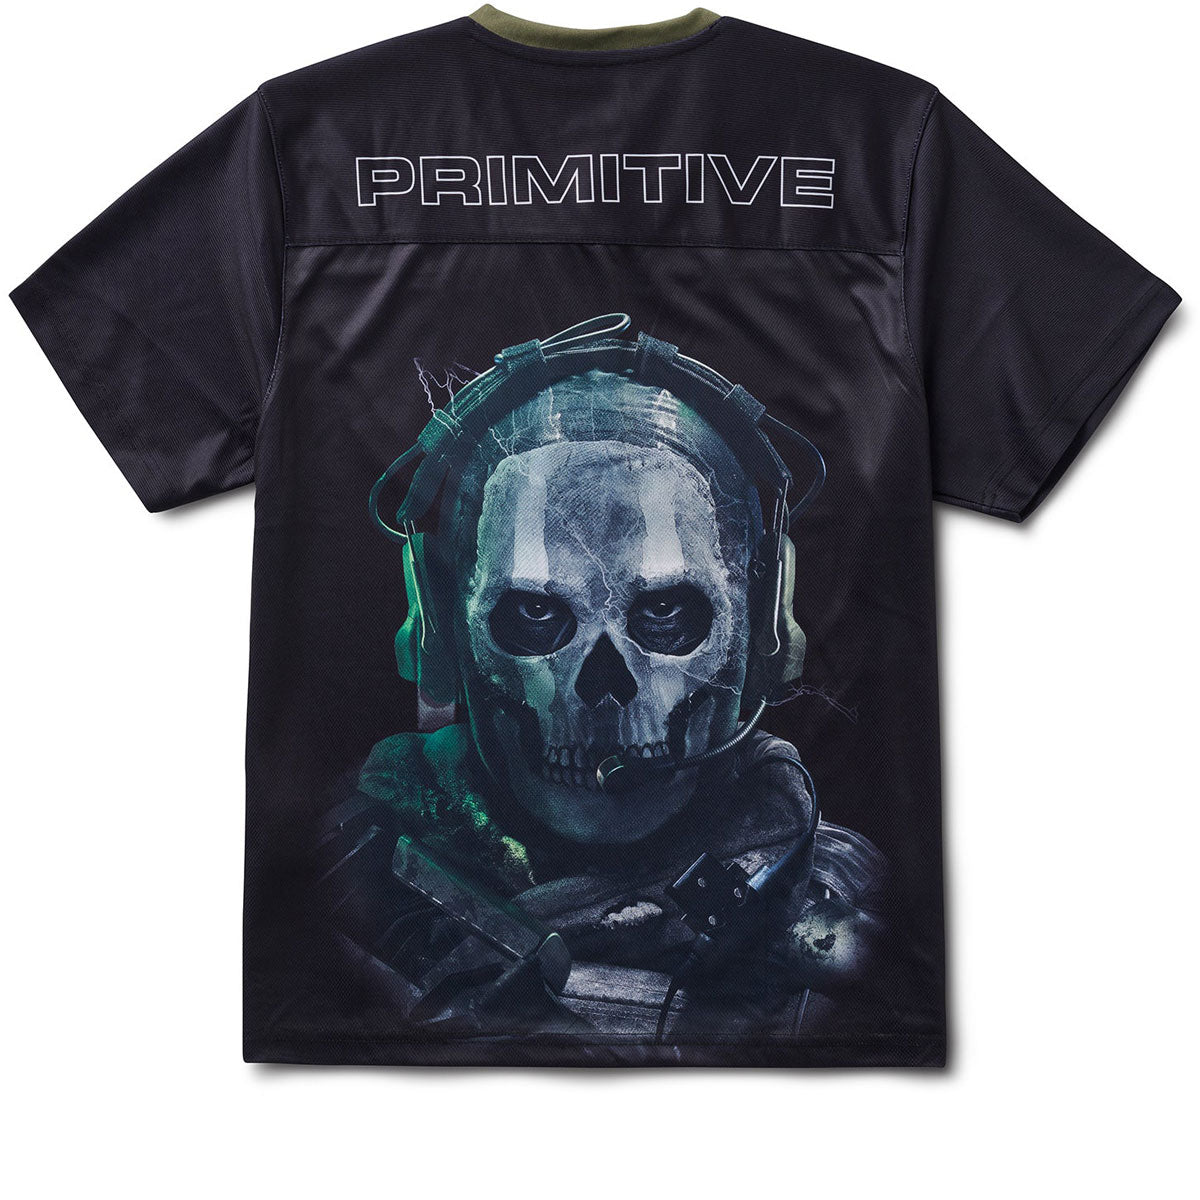 Primitive x Call Of Duty Ghost Jersey - Black image 2